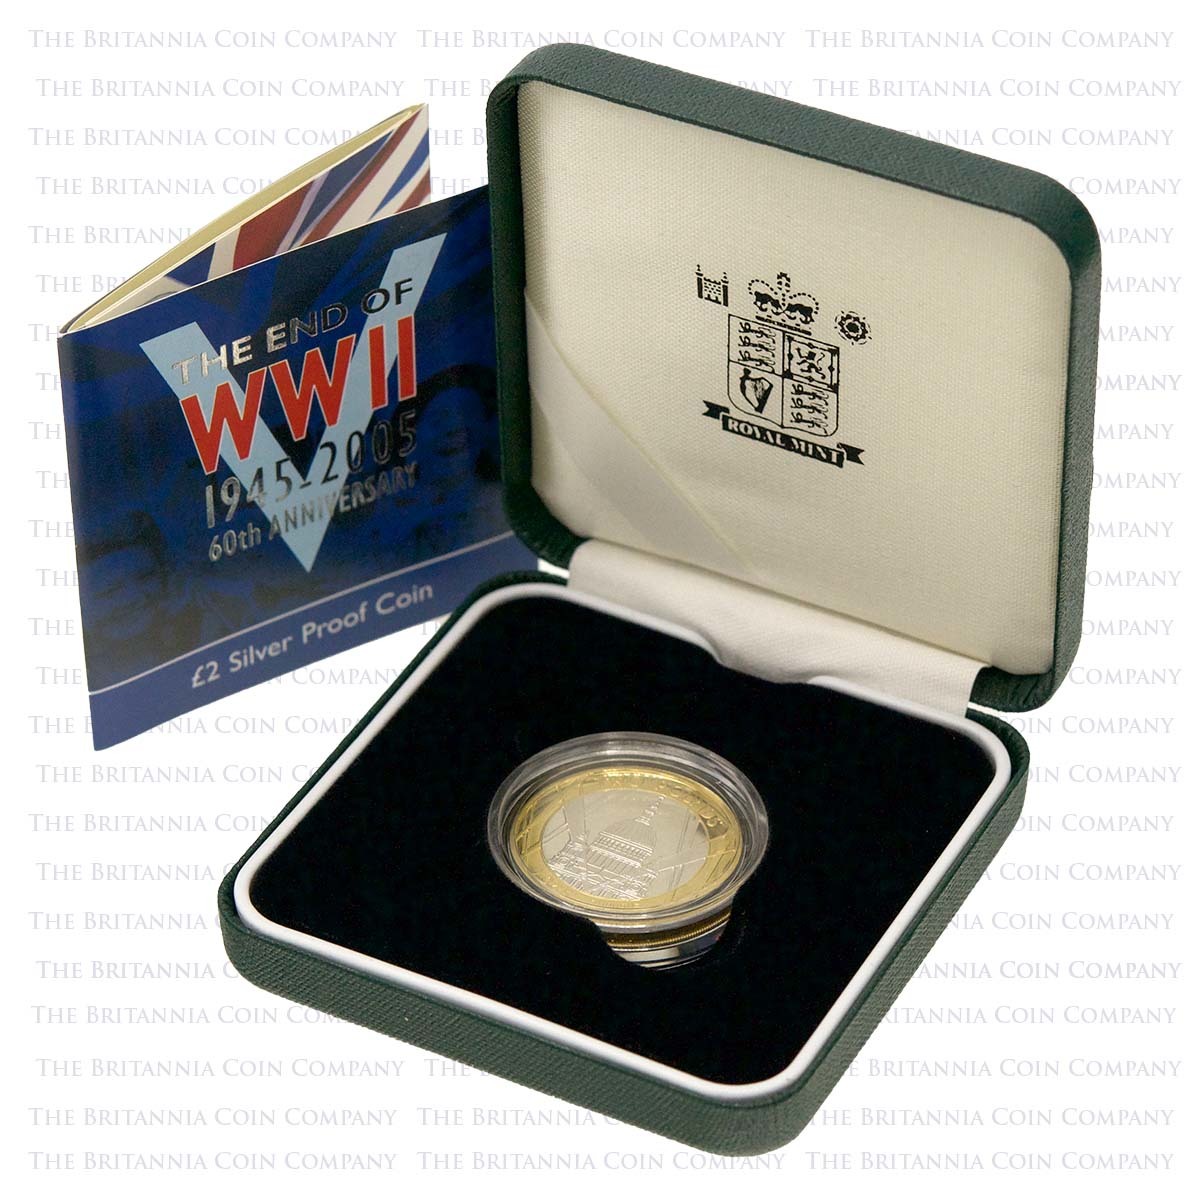 2005 End of WWII 60th Anniversary £2 Silver Proof Boxed